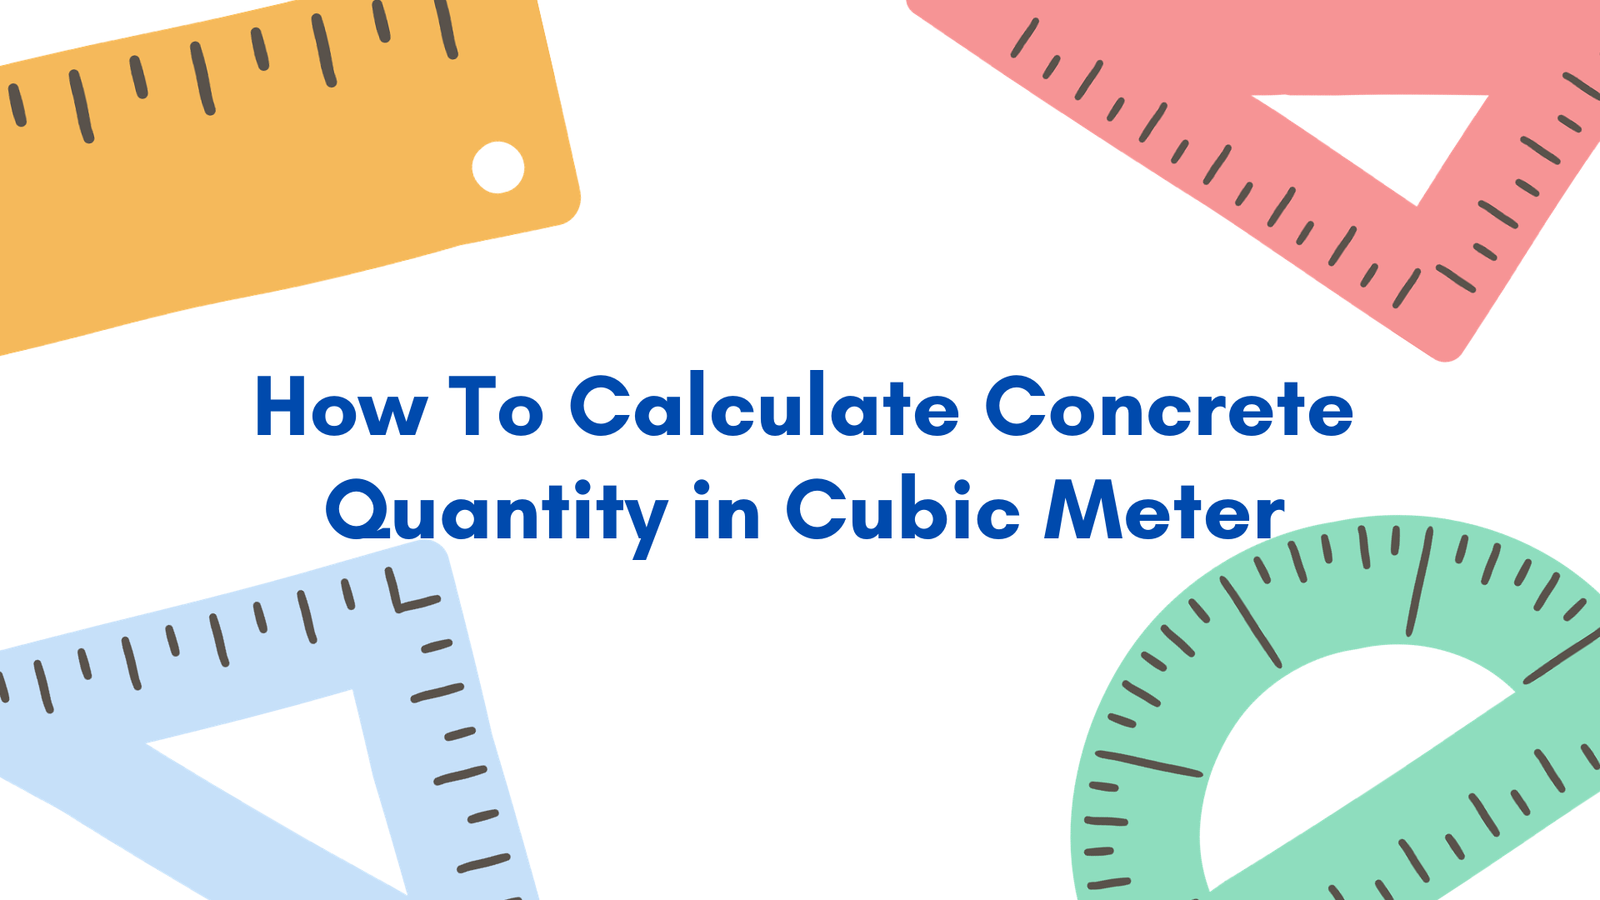 How To Calculate Concrete Quantity in Cubic Meter